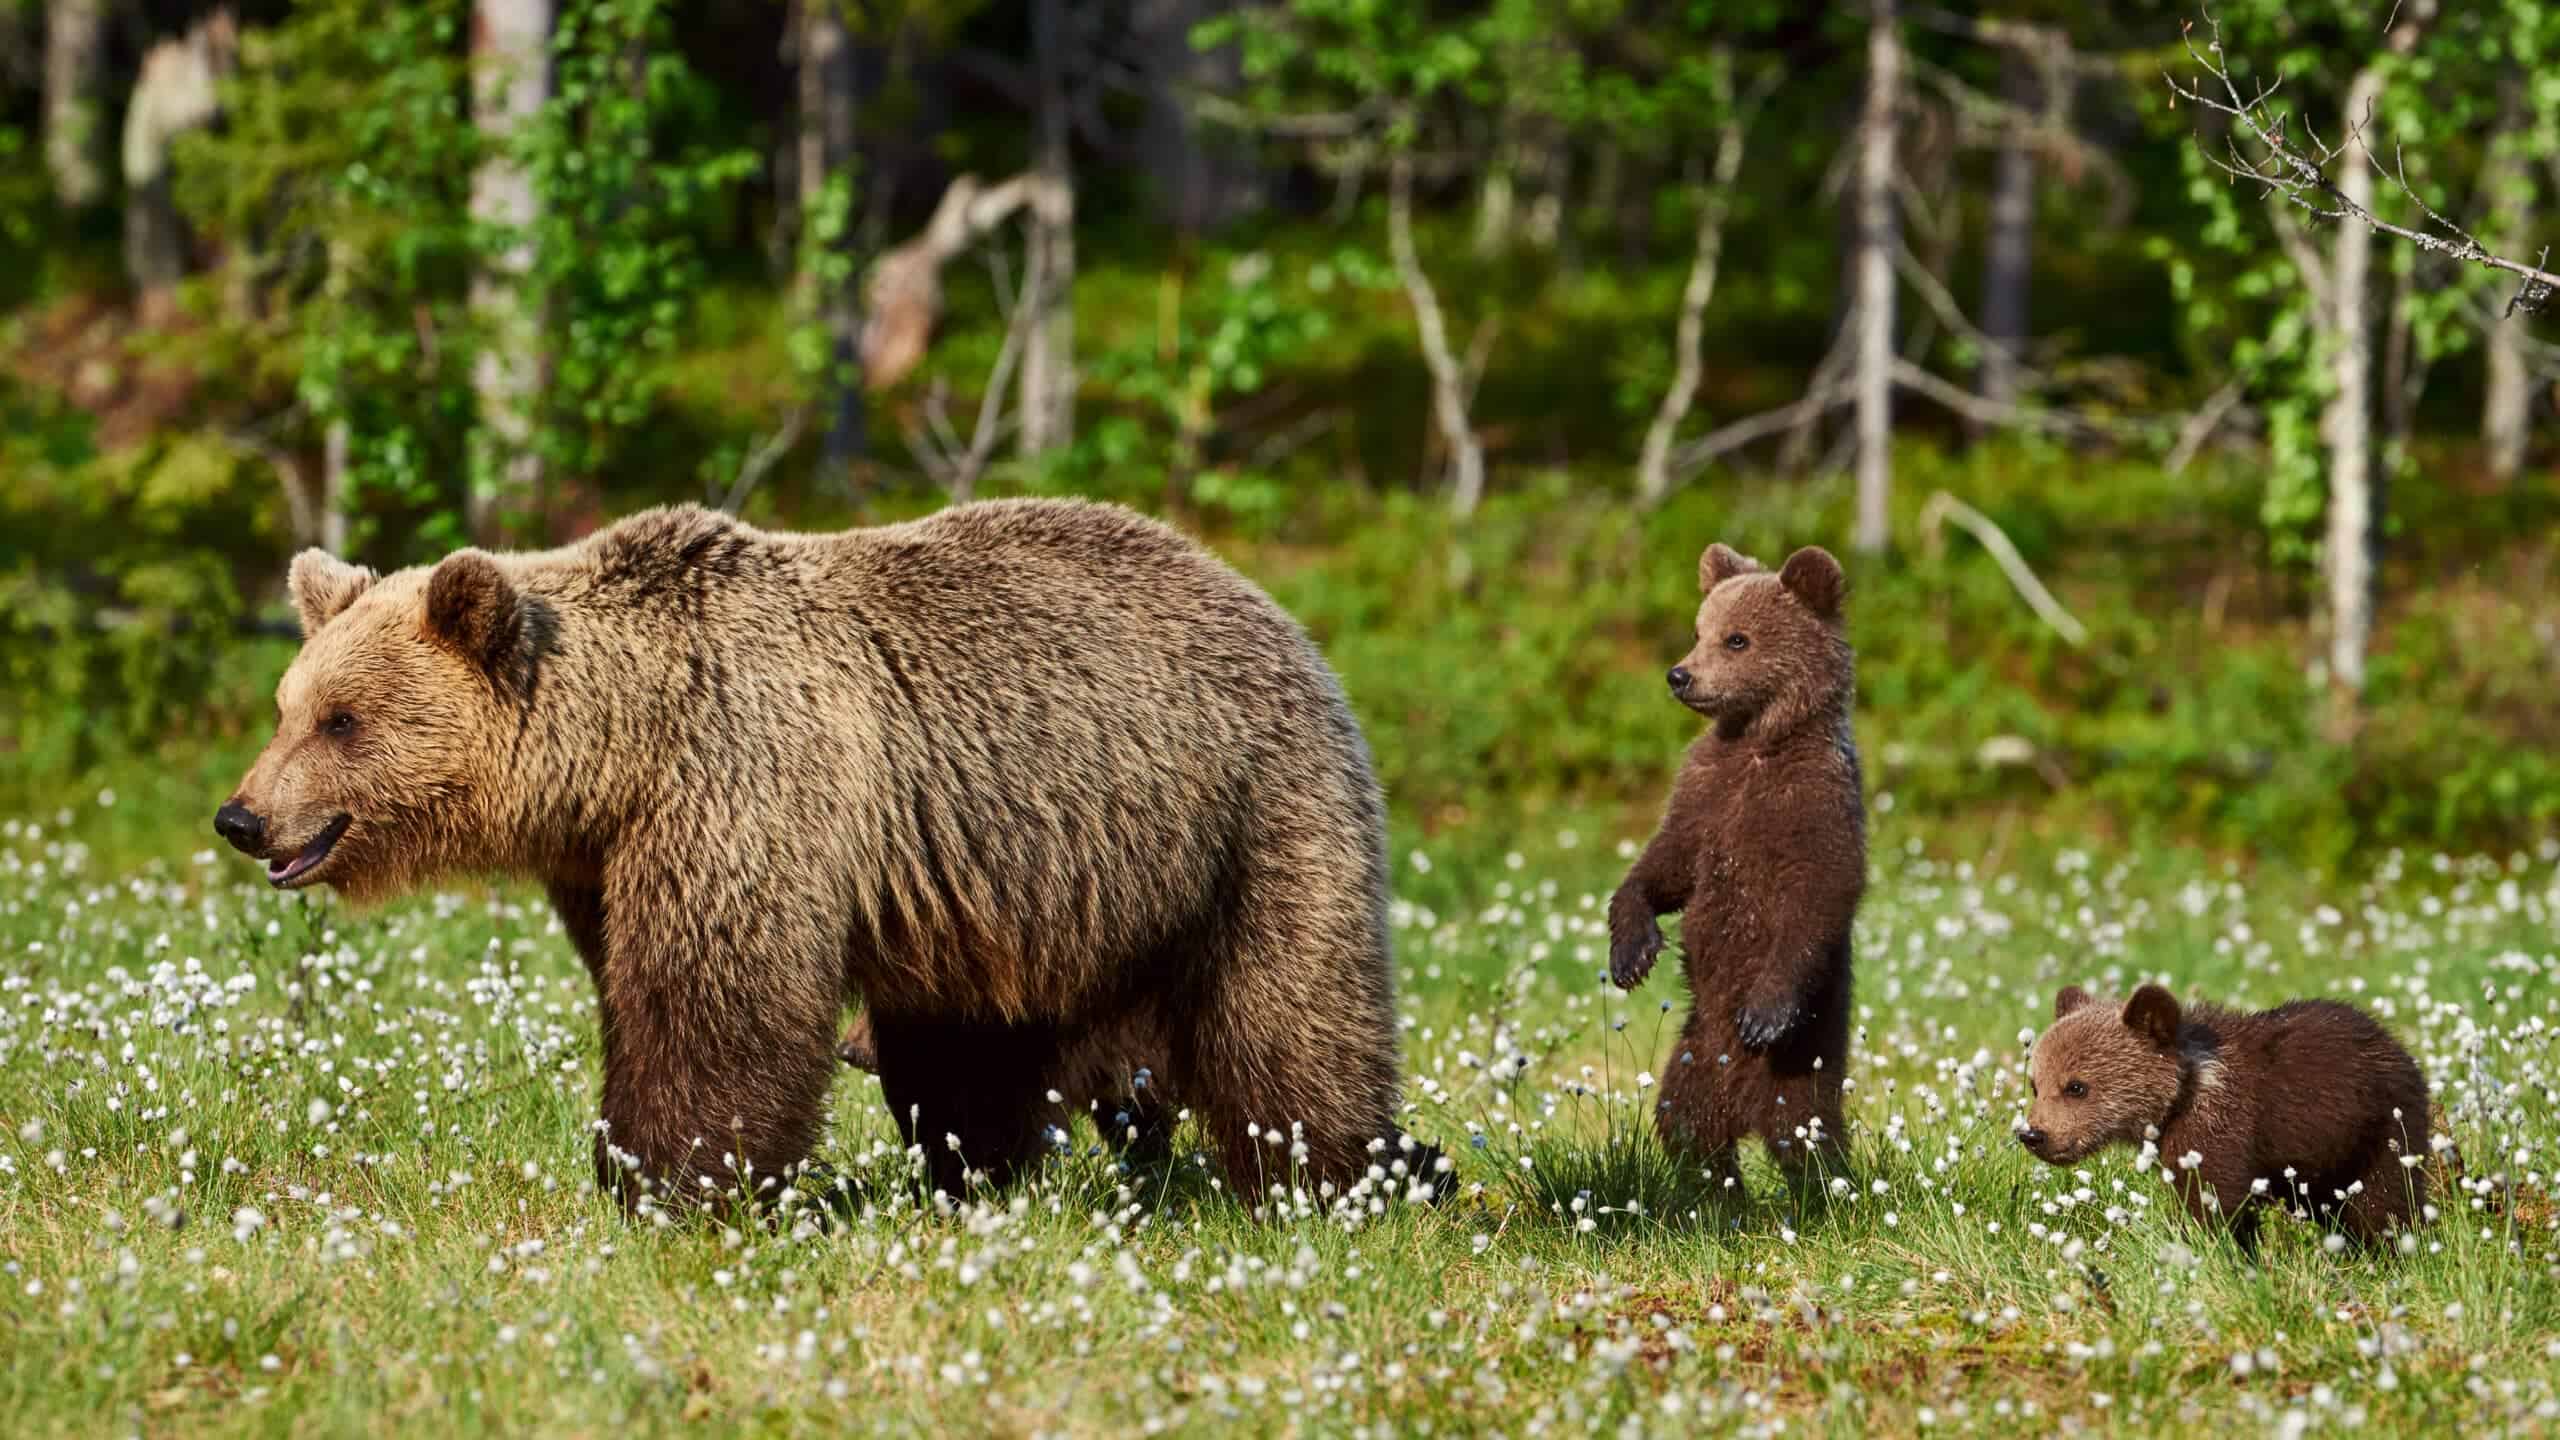 <p>To protect your backyard and pets from these <a href="https://www.animalsaroundtheglobe.com/playful-encounter-between-two-brown-bears-in-the-finnish-wilderness-1-170977/">giant creatures</a>, consider locking up pet food in your house or garage. In addition, if you love to feed outdoor pets and birds, clean the leftovers. Don’t leave pet and bird food outside unattended.</p> <p>If you have outdoor dogs and cats and you love to feed birds, don’t leave their food outside. Bears are omnivores, meaning that their diet consists of meat and plants. They can be attracted by the pet food you leave outside for your pets and even the seeds you feed the local birds!</p>